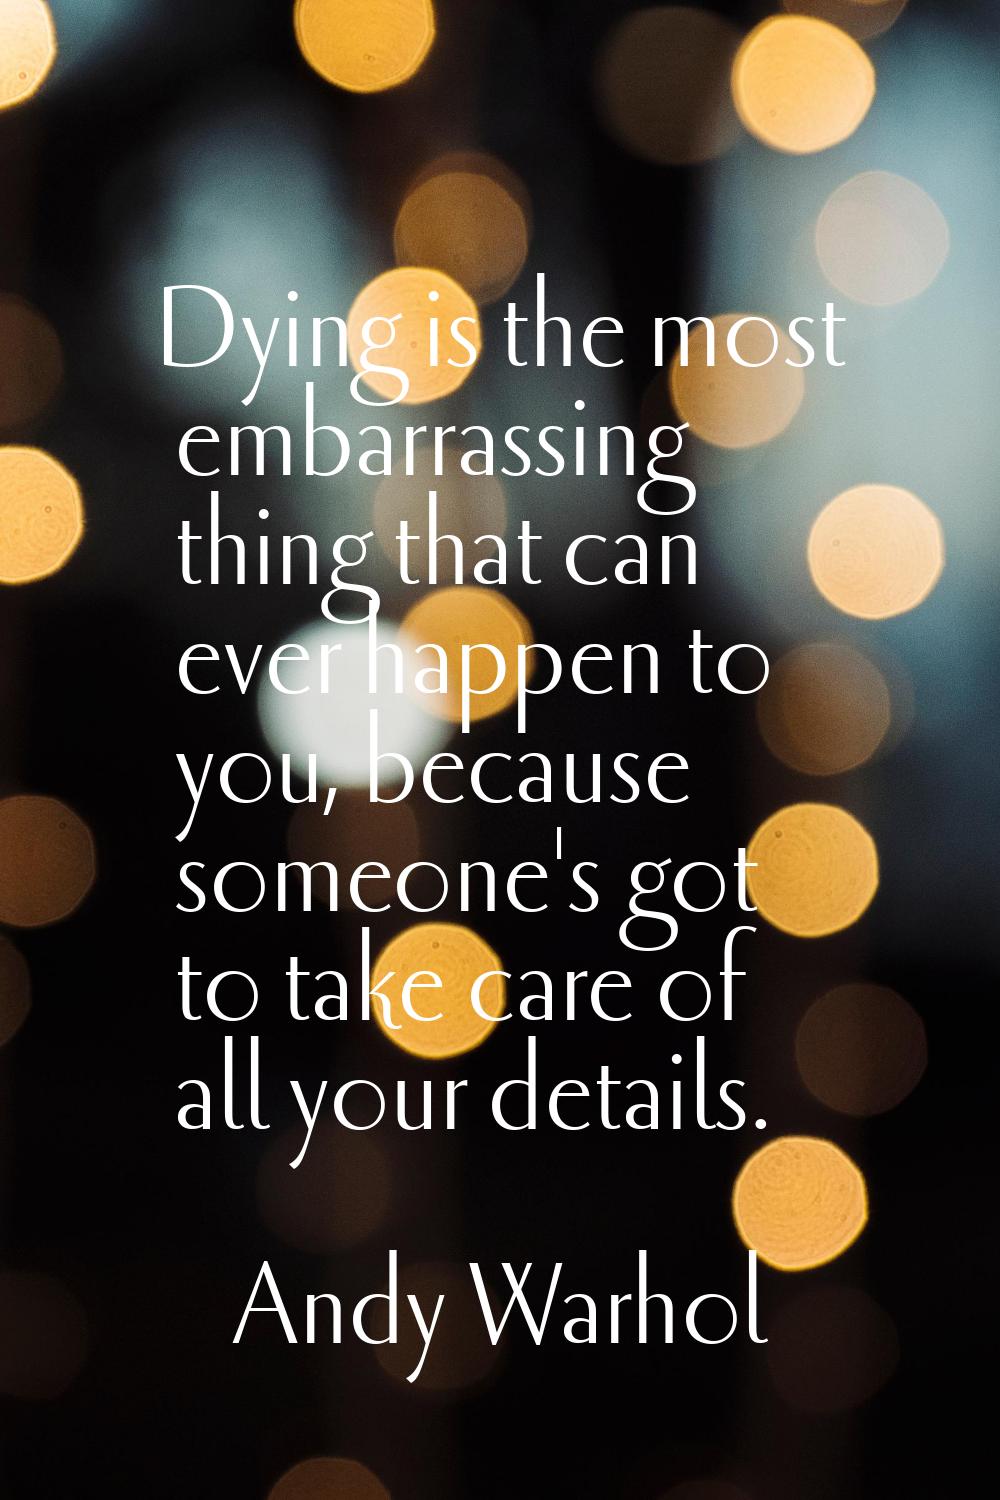 Dying is the most embarrassing thing that can ever happen to you, because someone's got to take car